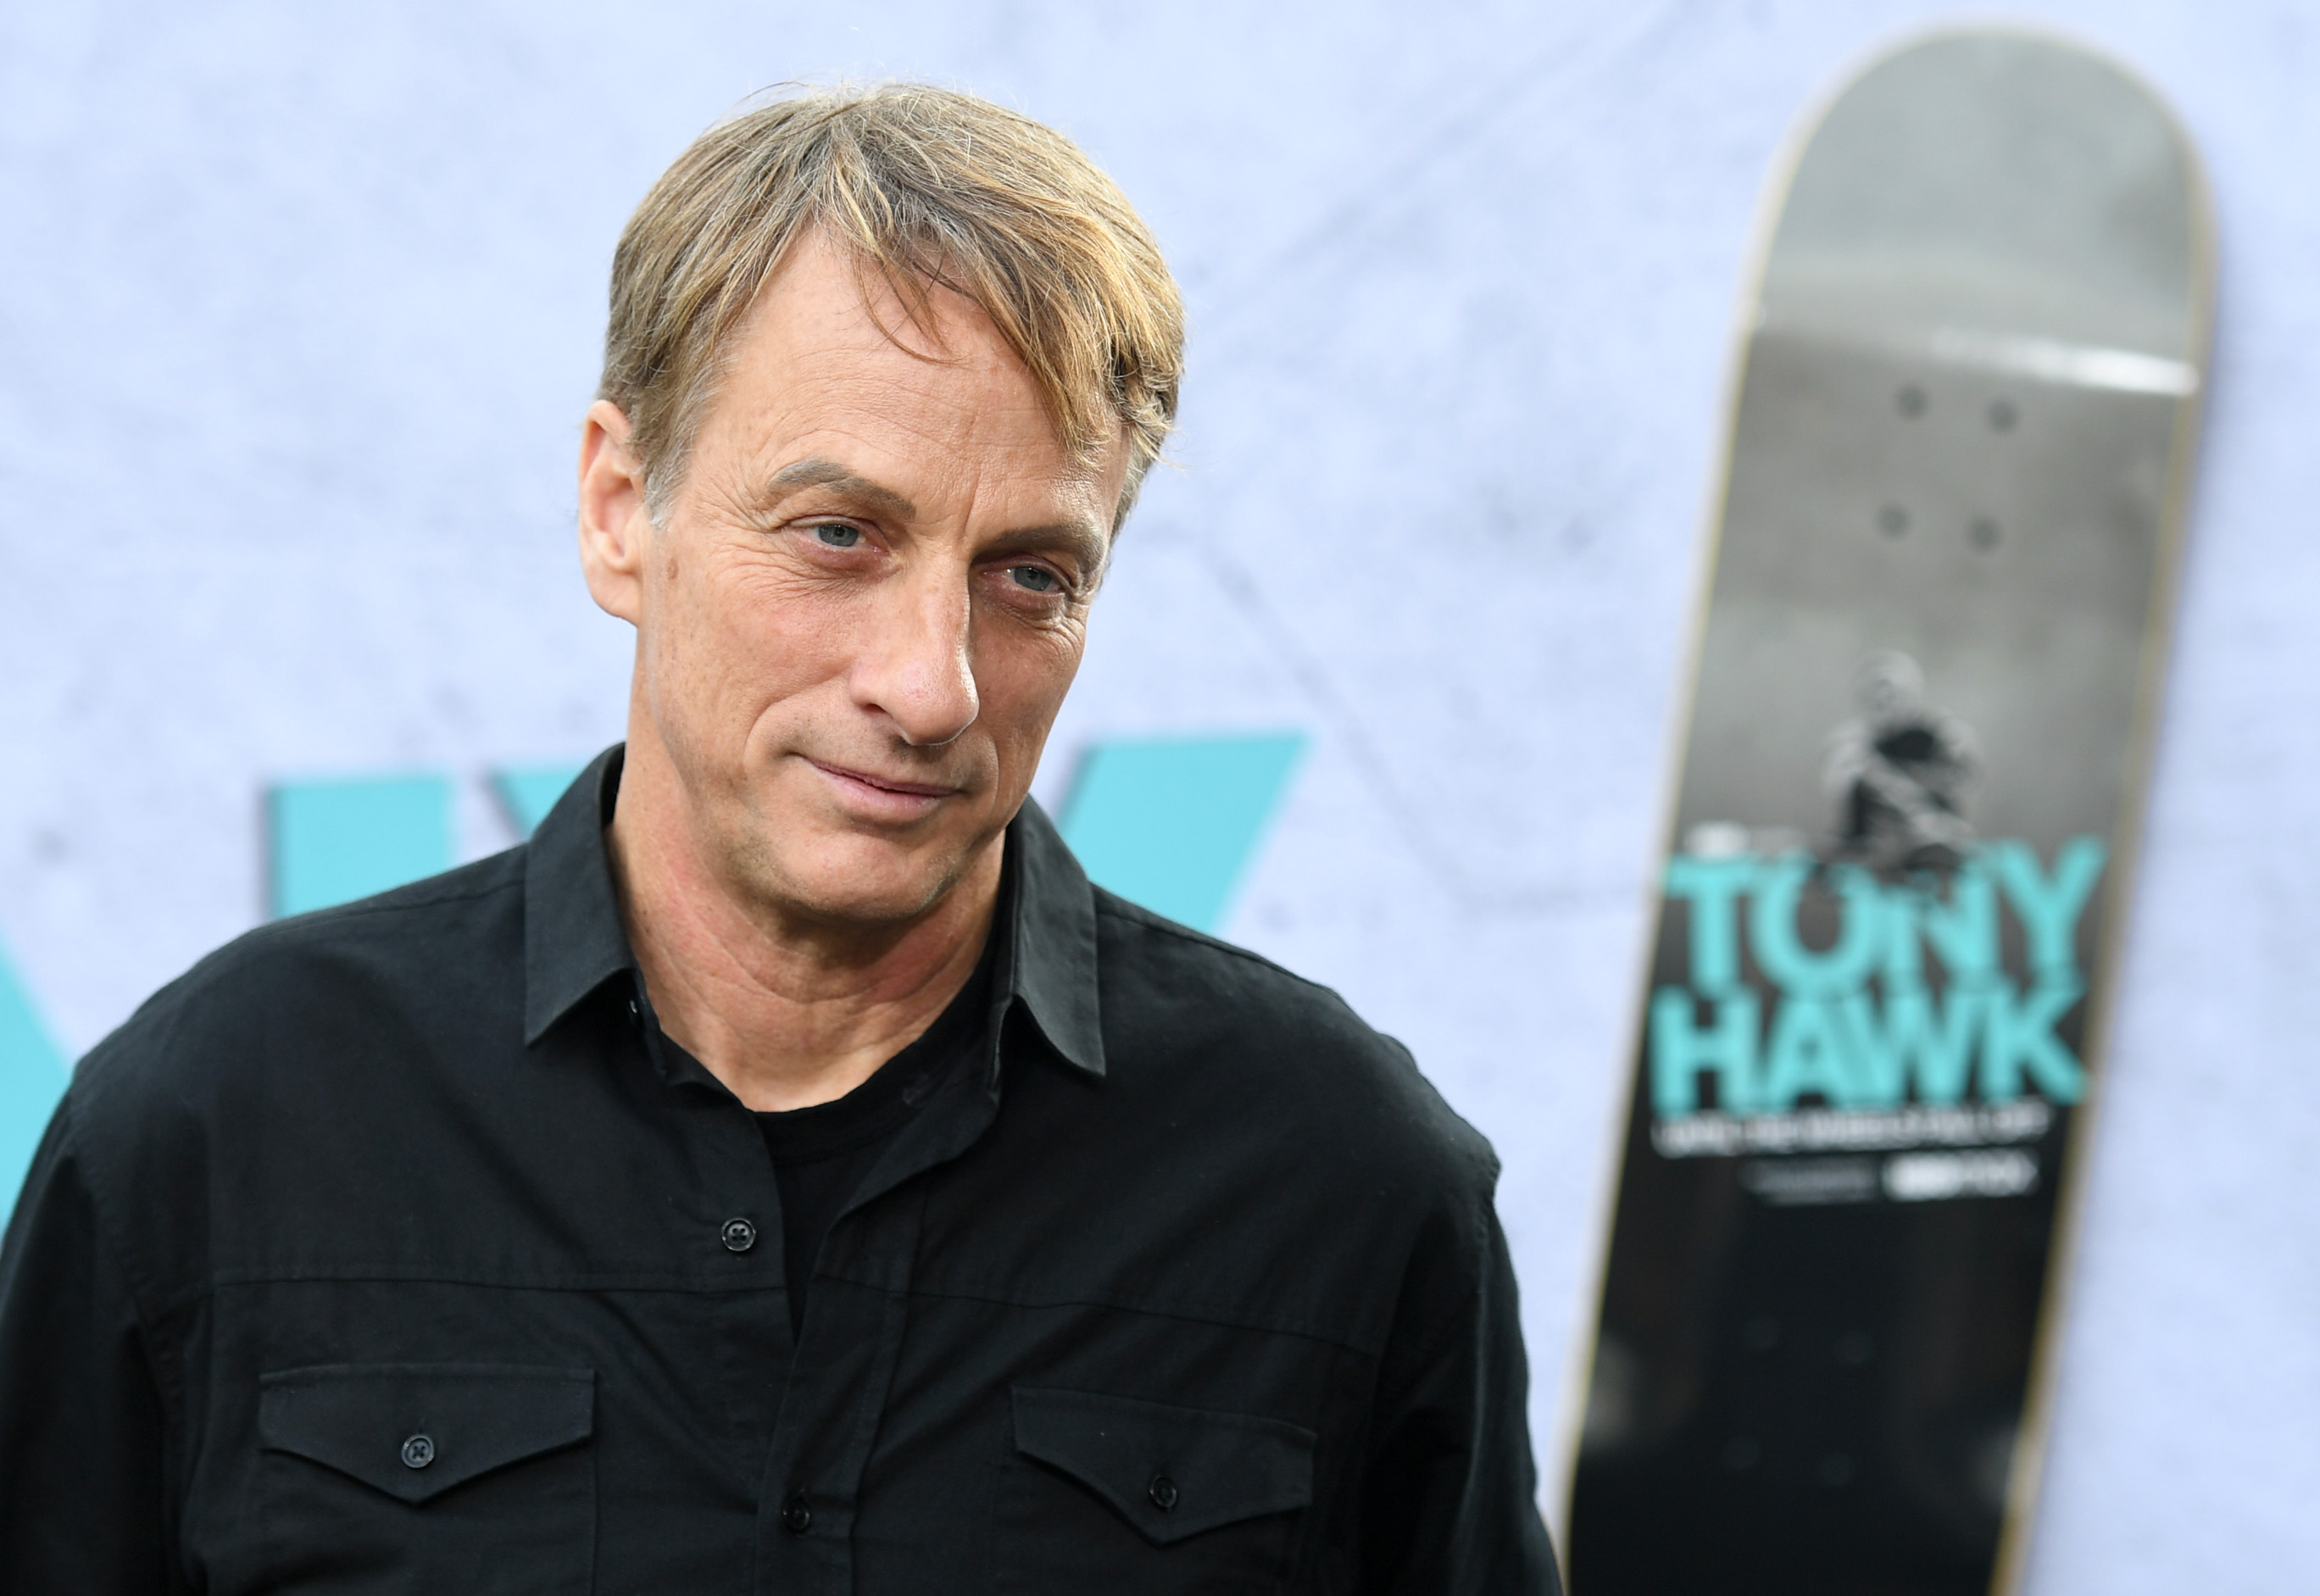 5 Healthy Habits Tony Hawk Swears By to Stay Fit at Age 54